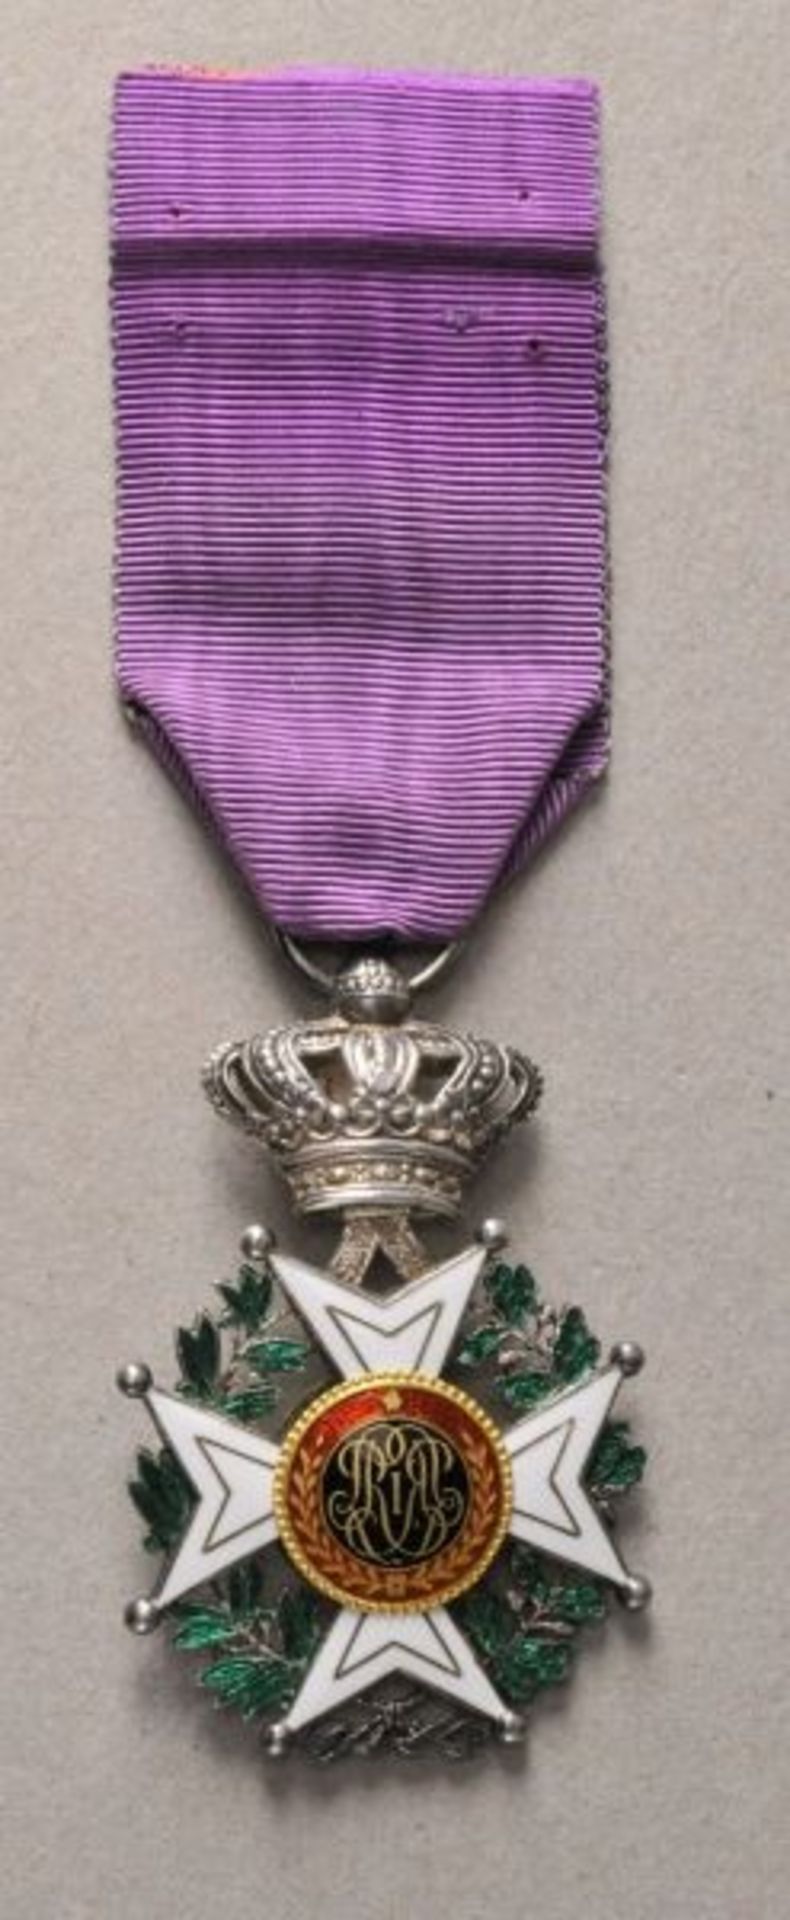 Belgium  Leopold-Orden, 2nd model (1839-1951), knights cross.  Silver, medals gold, partly enameled,